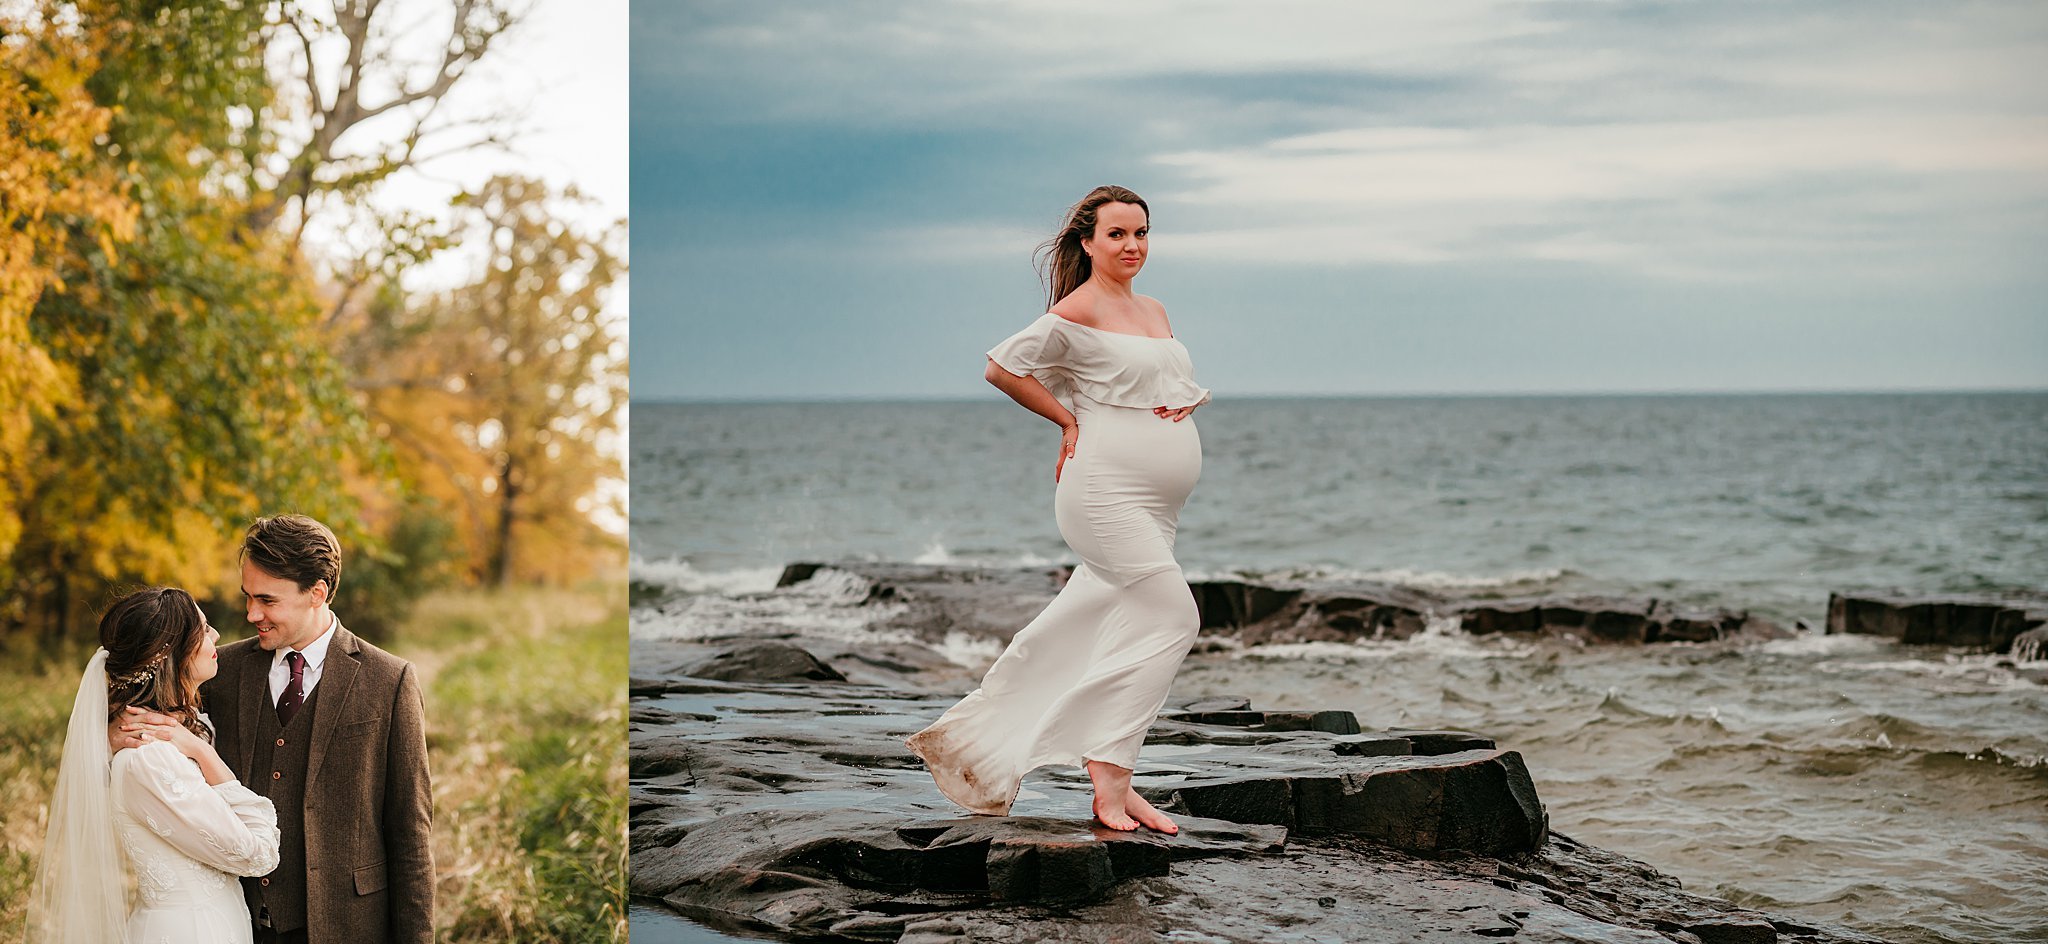 Sisters in law hire same Minnesota photographer